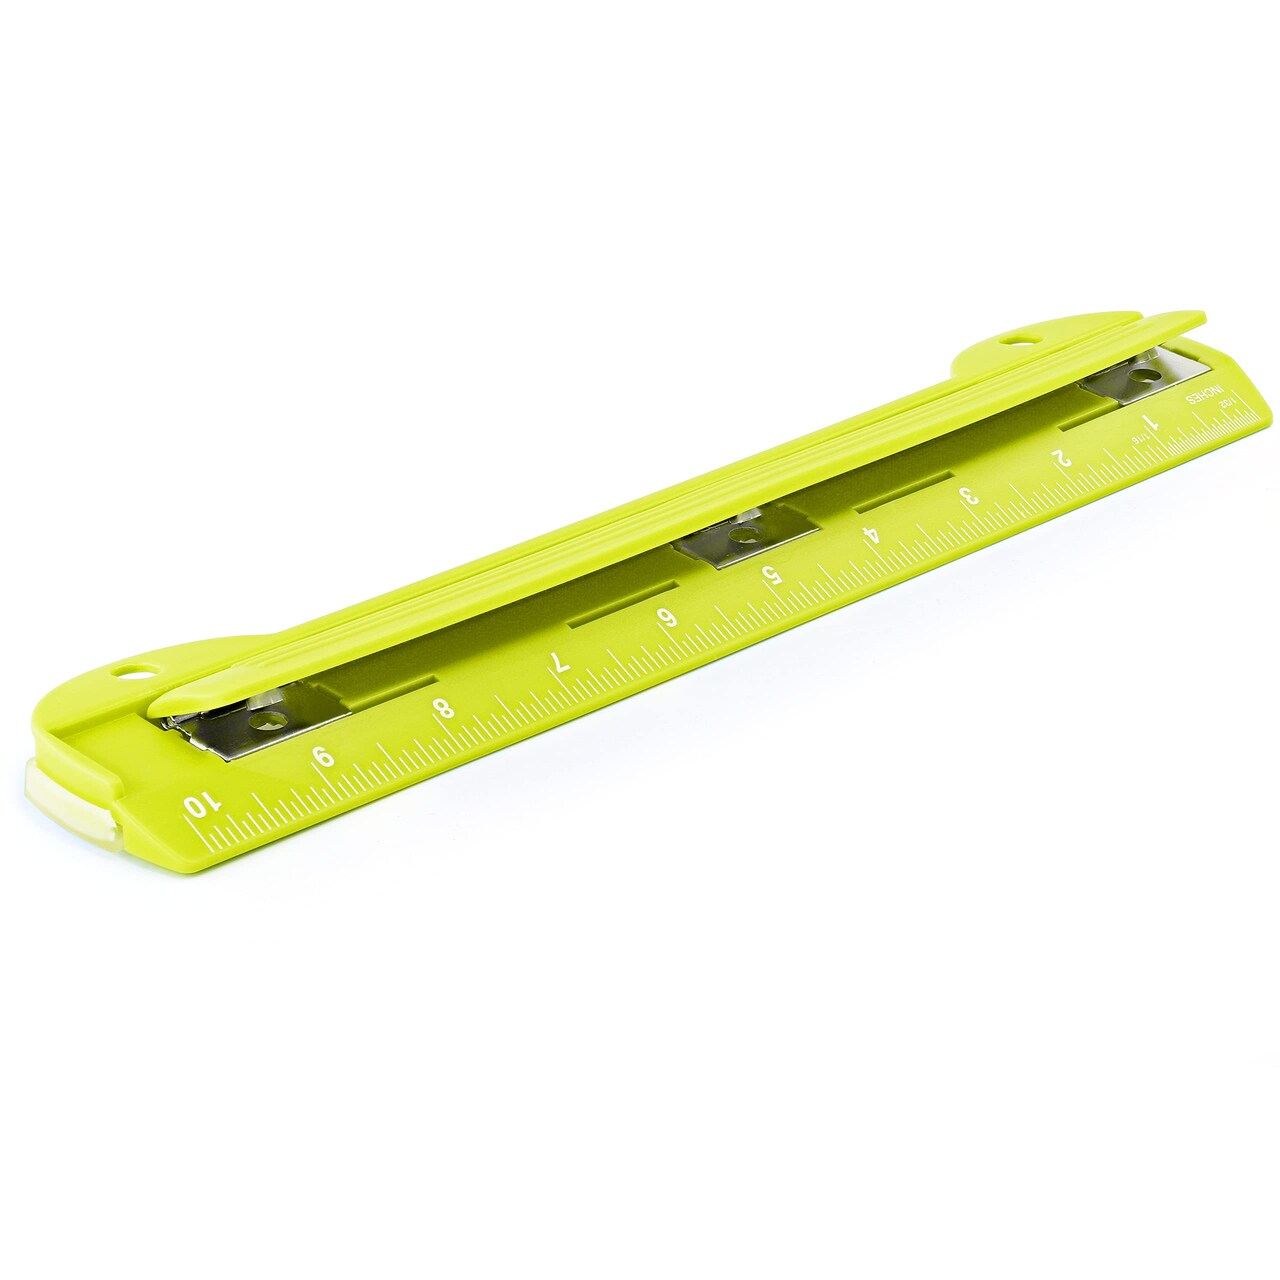 Enday Portable 3-Hole Paper Punch